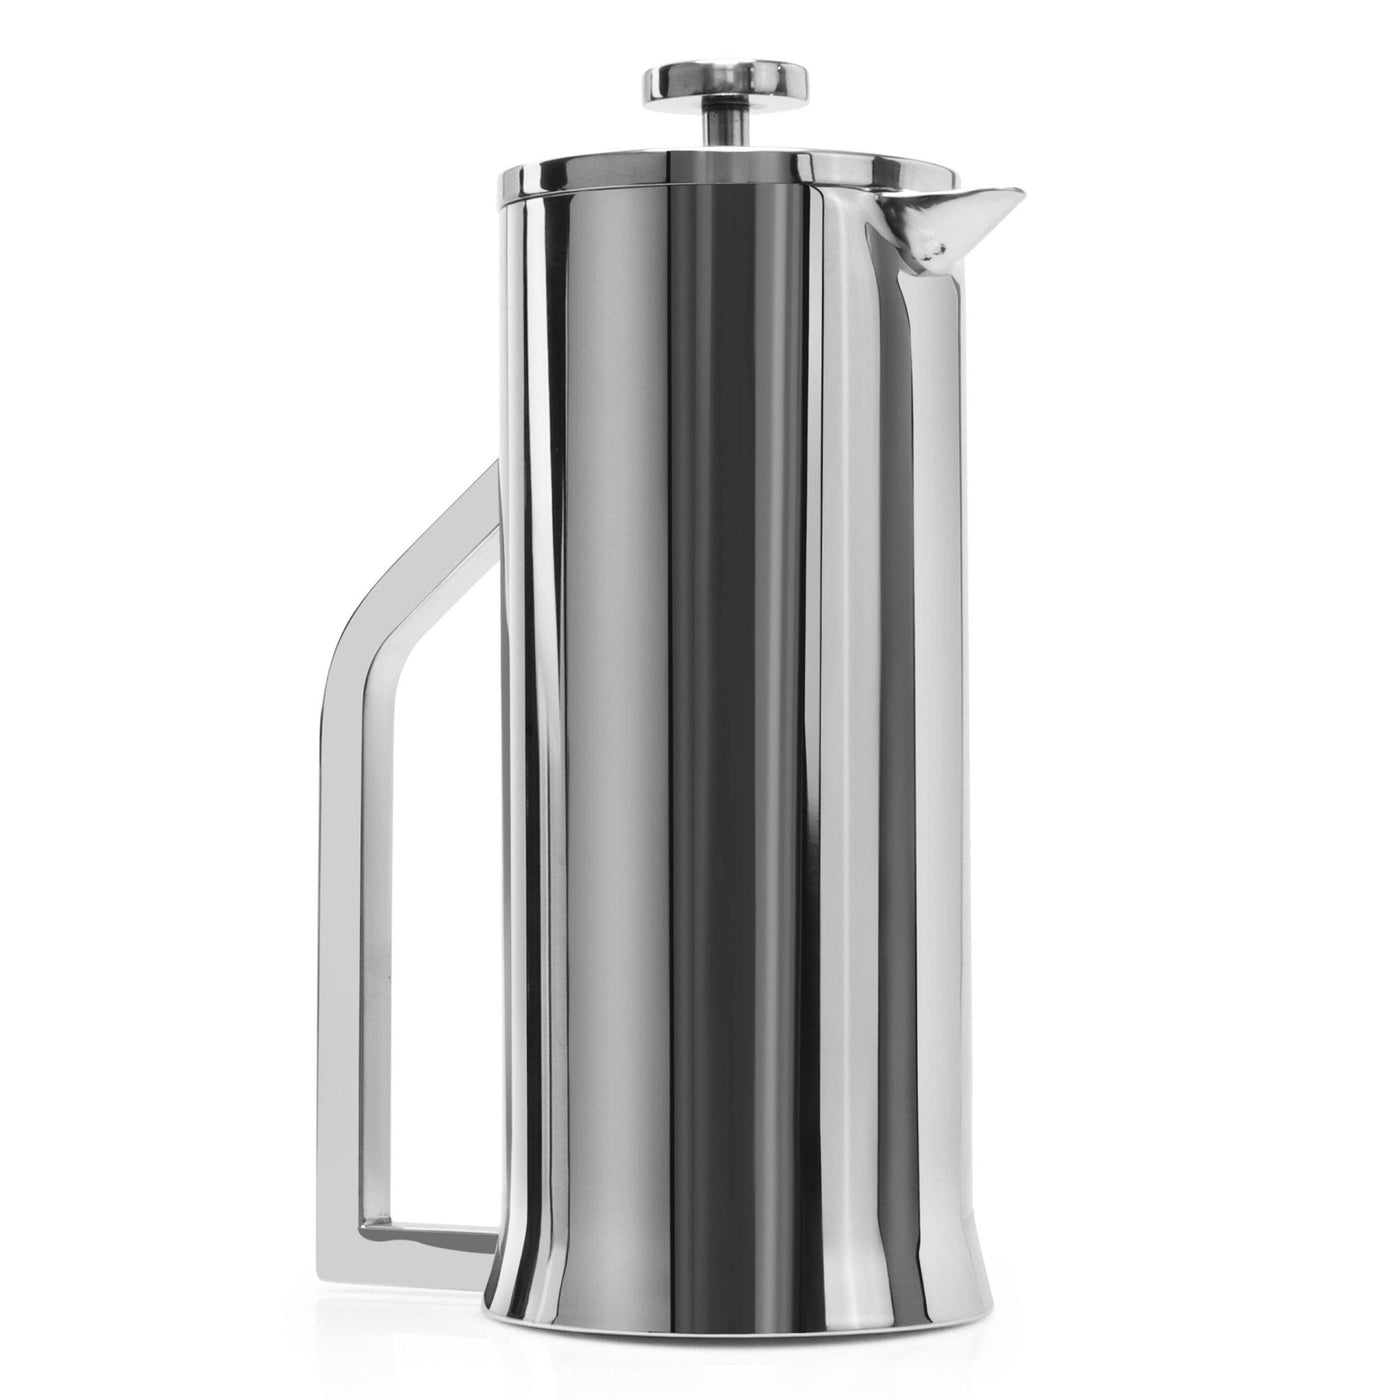  French Press Coffee Maker 50 Oz – Insulated Coffee